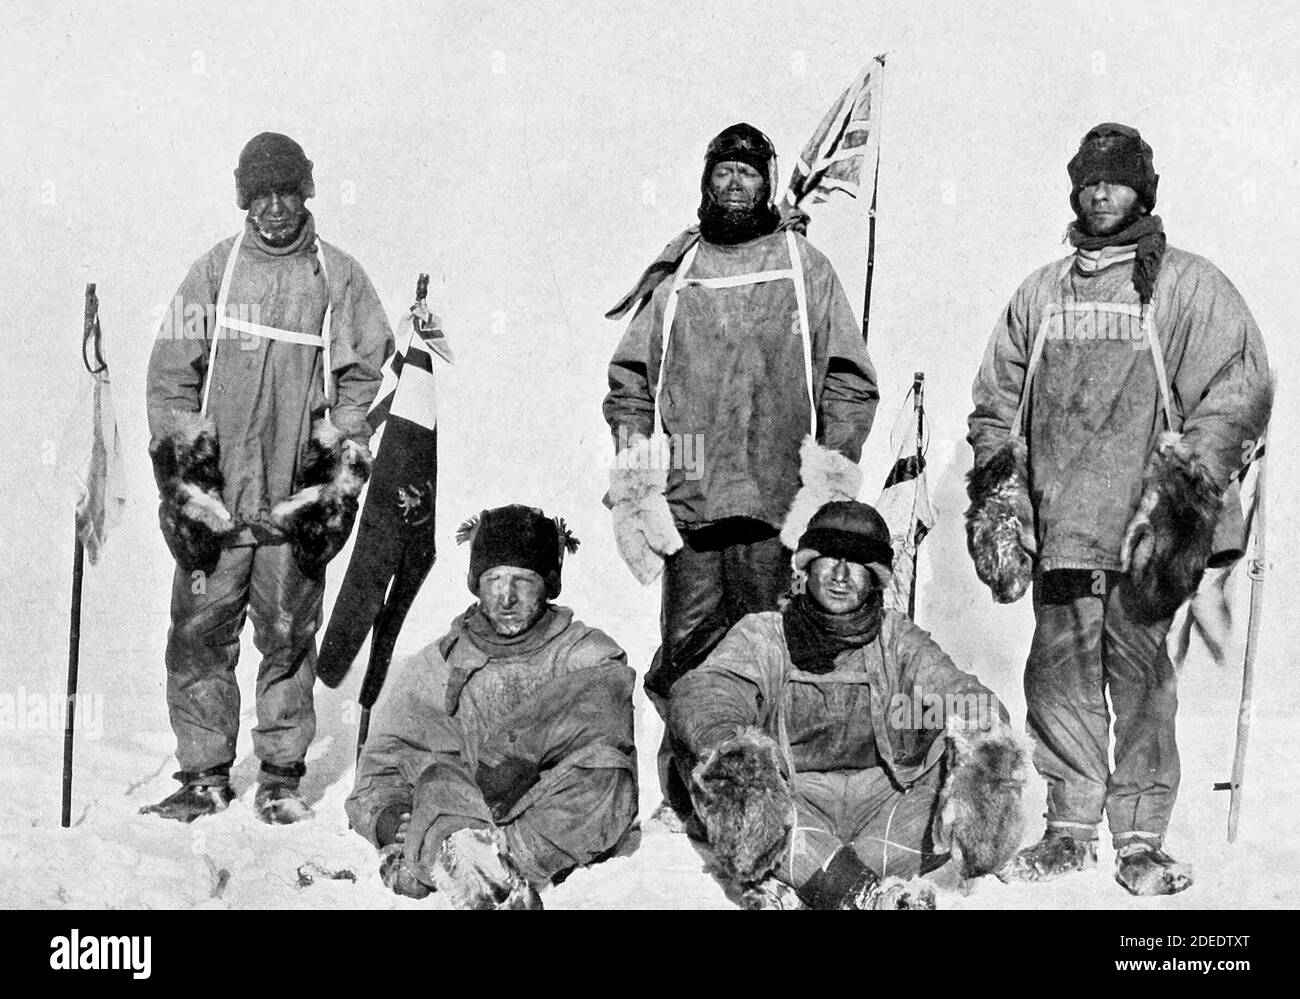 Robert Falcon Scott's Pole party of his ill-fated expedition, from left to right at the Pole: Oates (standing), Bowers (sitting), Scott (standing in front of Union Jack flag on pole), Wilson (sitting), Evans (standing). Bowers took this photograph, using a piece of string to operate the camera shutter.  17 January 1912 Stock Photo